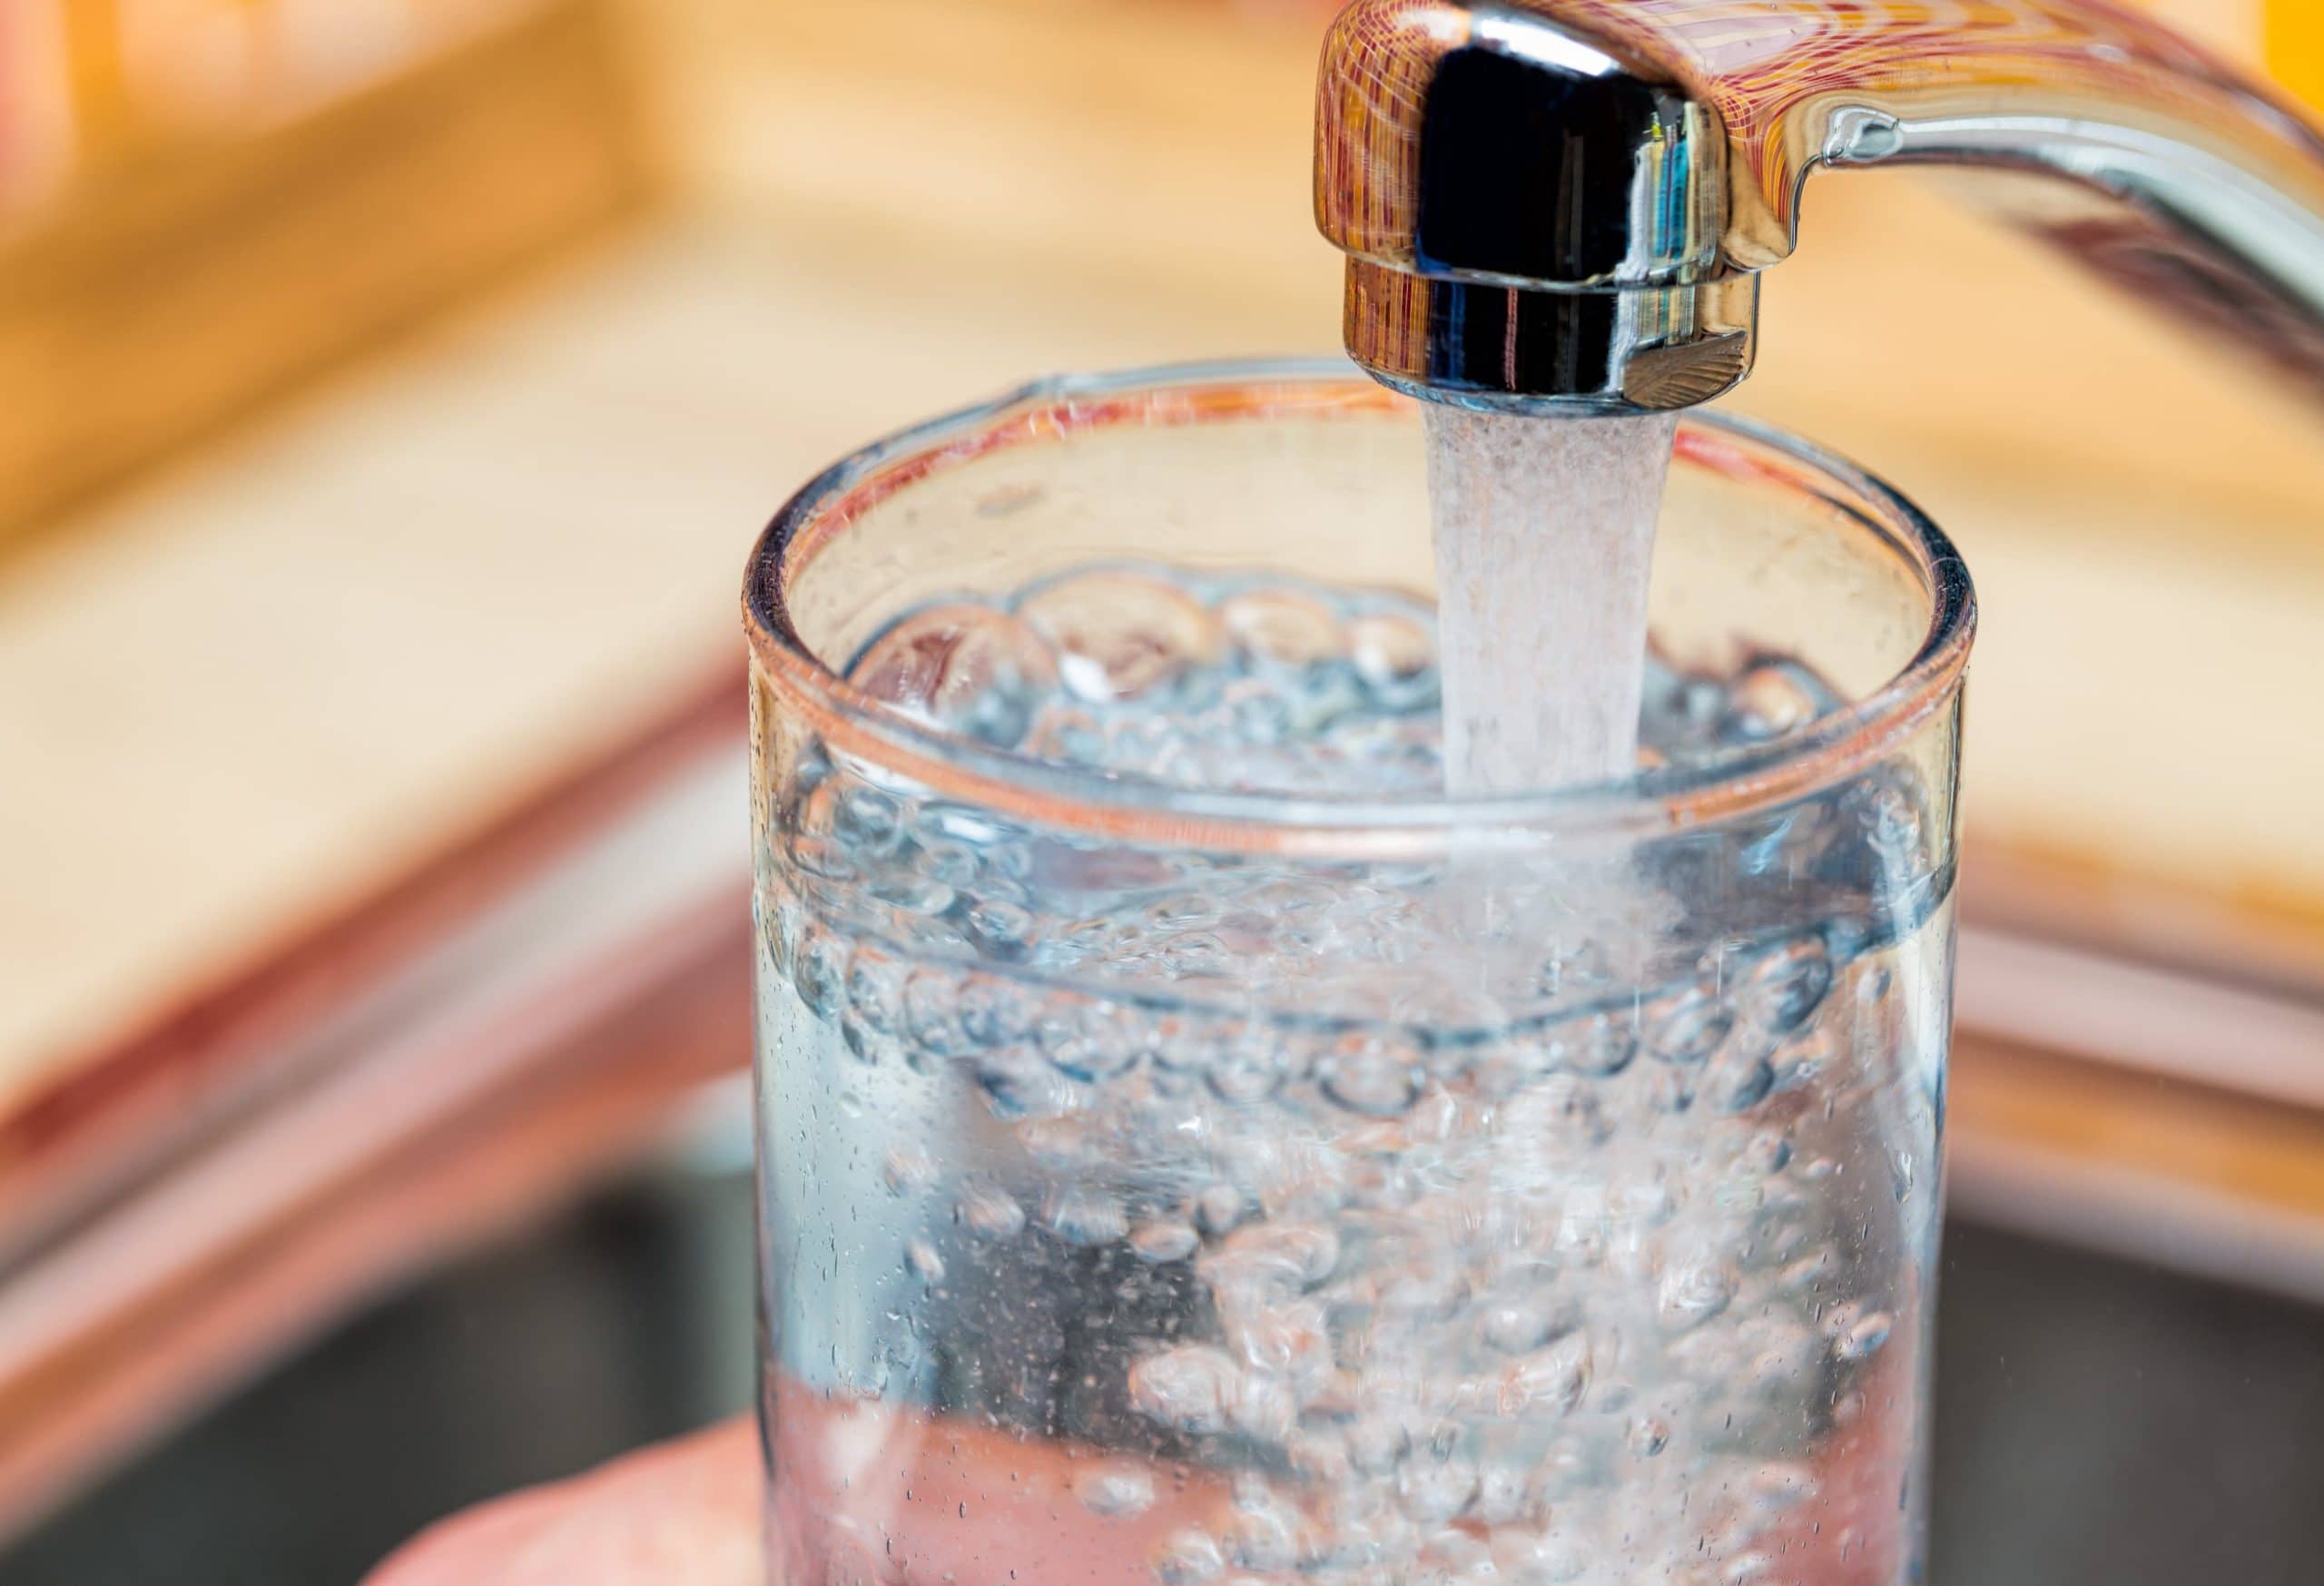 Drinking water with common water contaminants